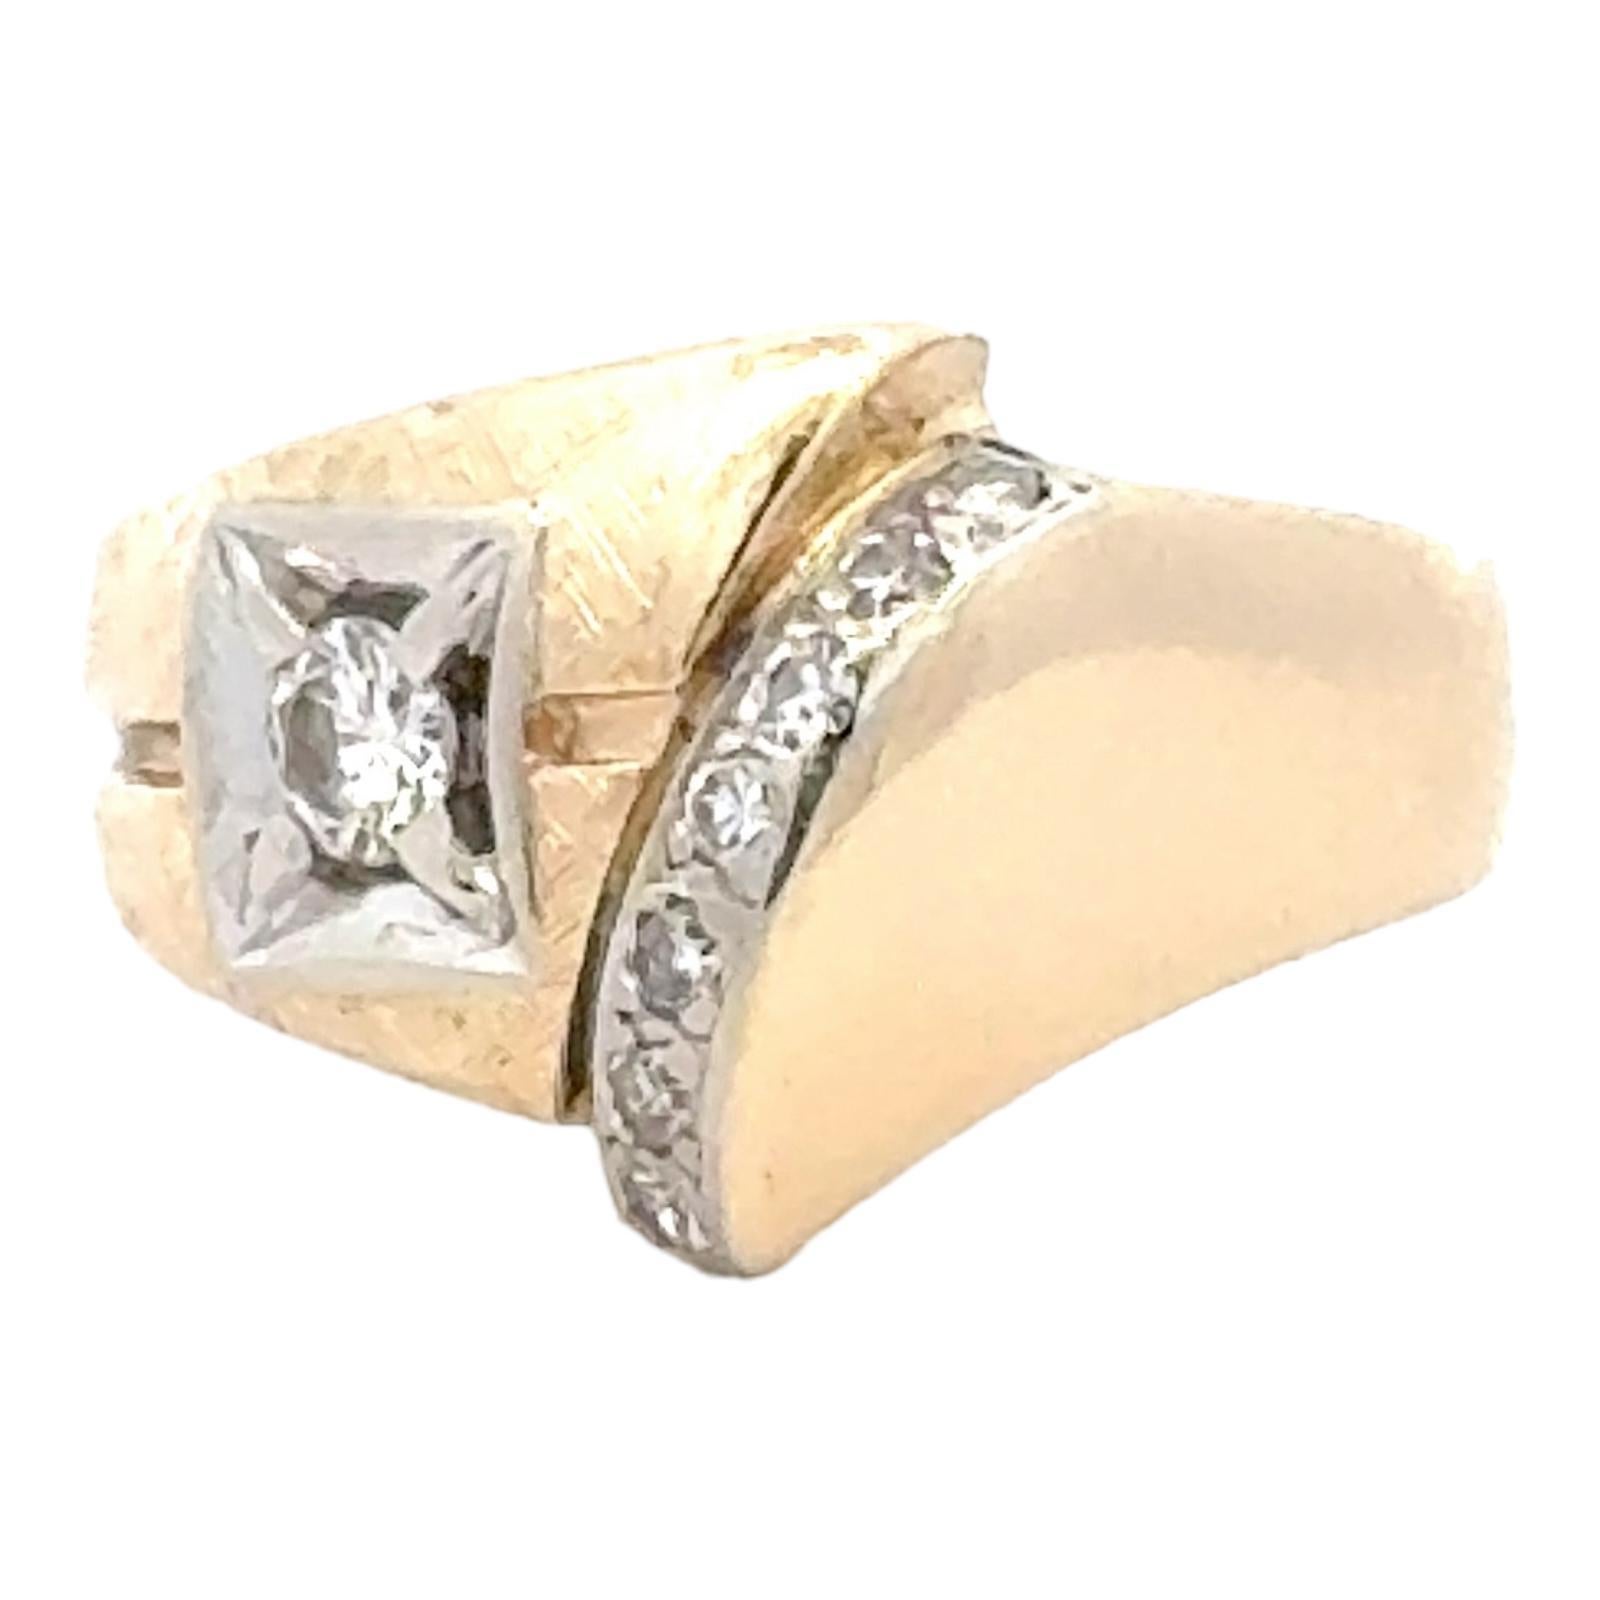 Contemporary diamond band ring fashioned in 14 karat yellow gold. The ring features an approximately .20 carat center diamond and another .15CTW of side diamonds. The diamonds are graded G-H color and SI clarity. The band graduates from 5-15mm in